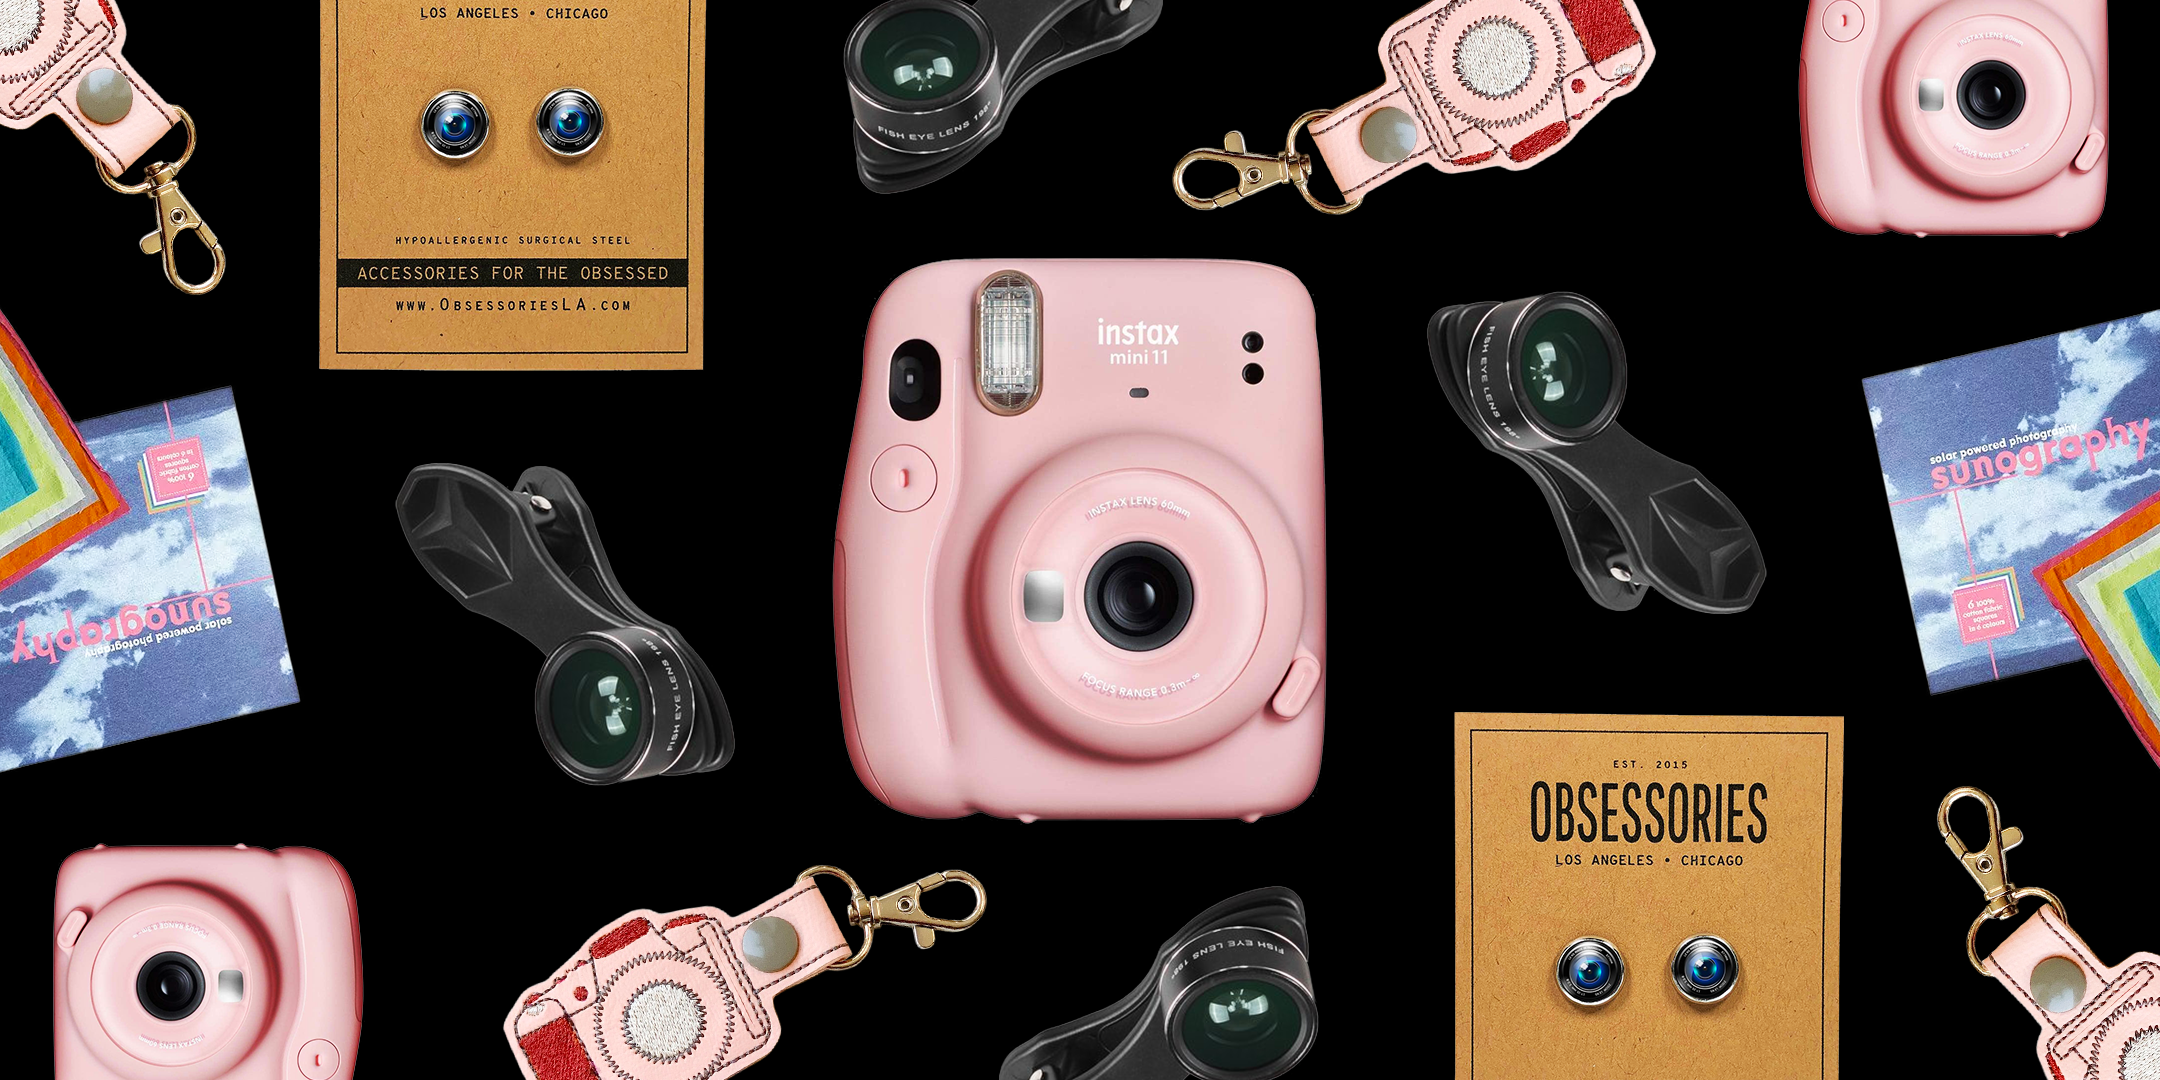 12 picture-perfect gifts for your photographer friends | TechCrunch